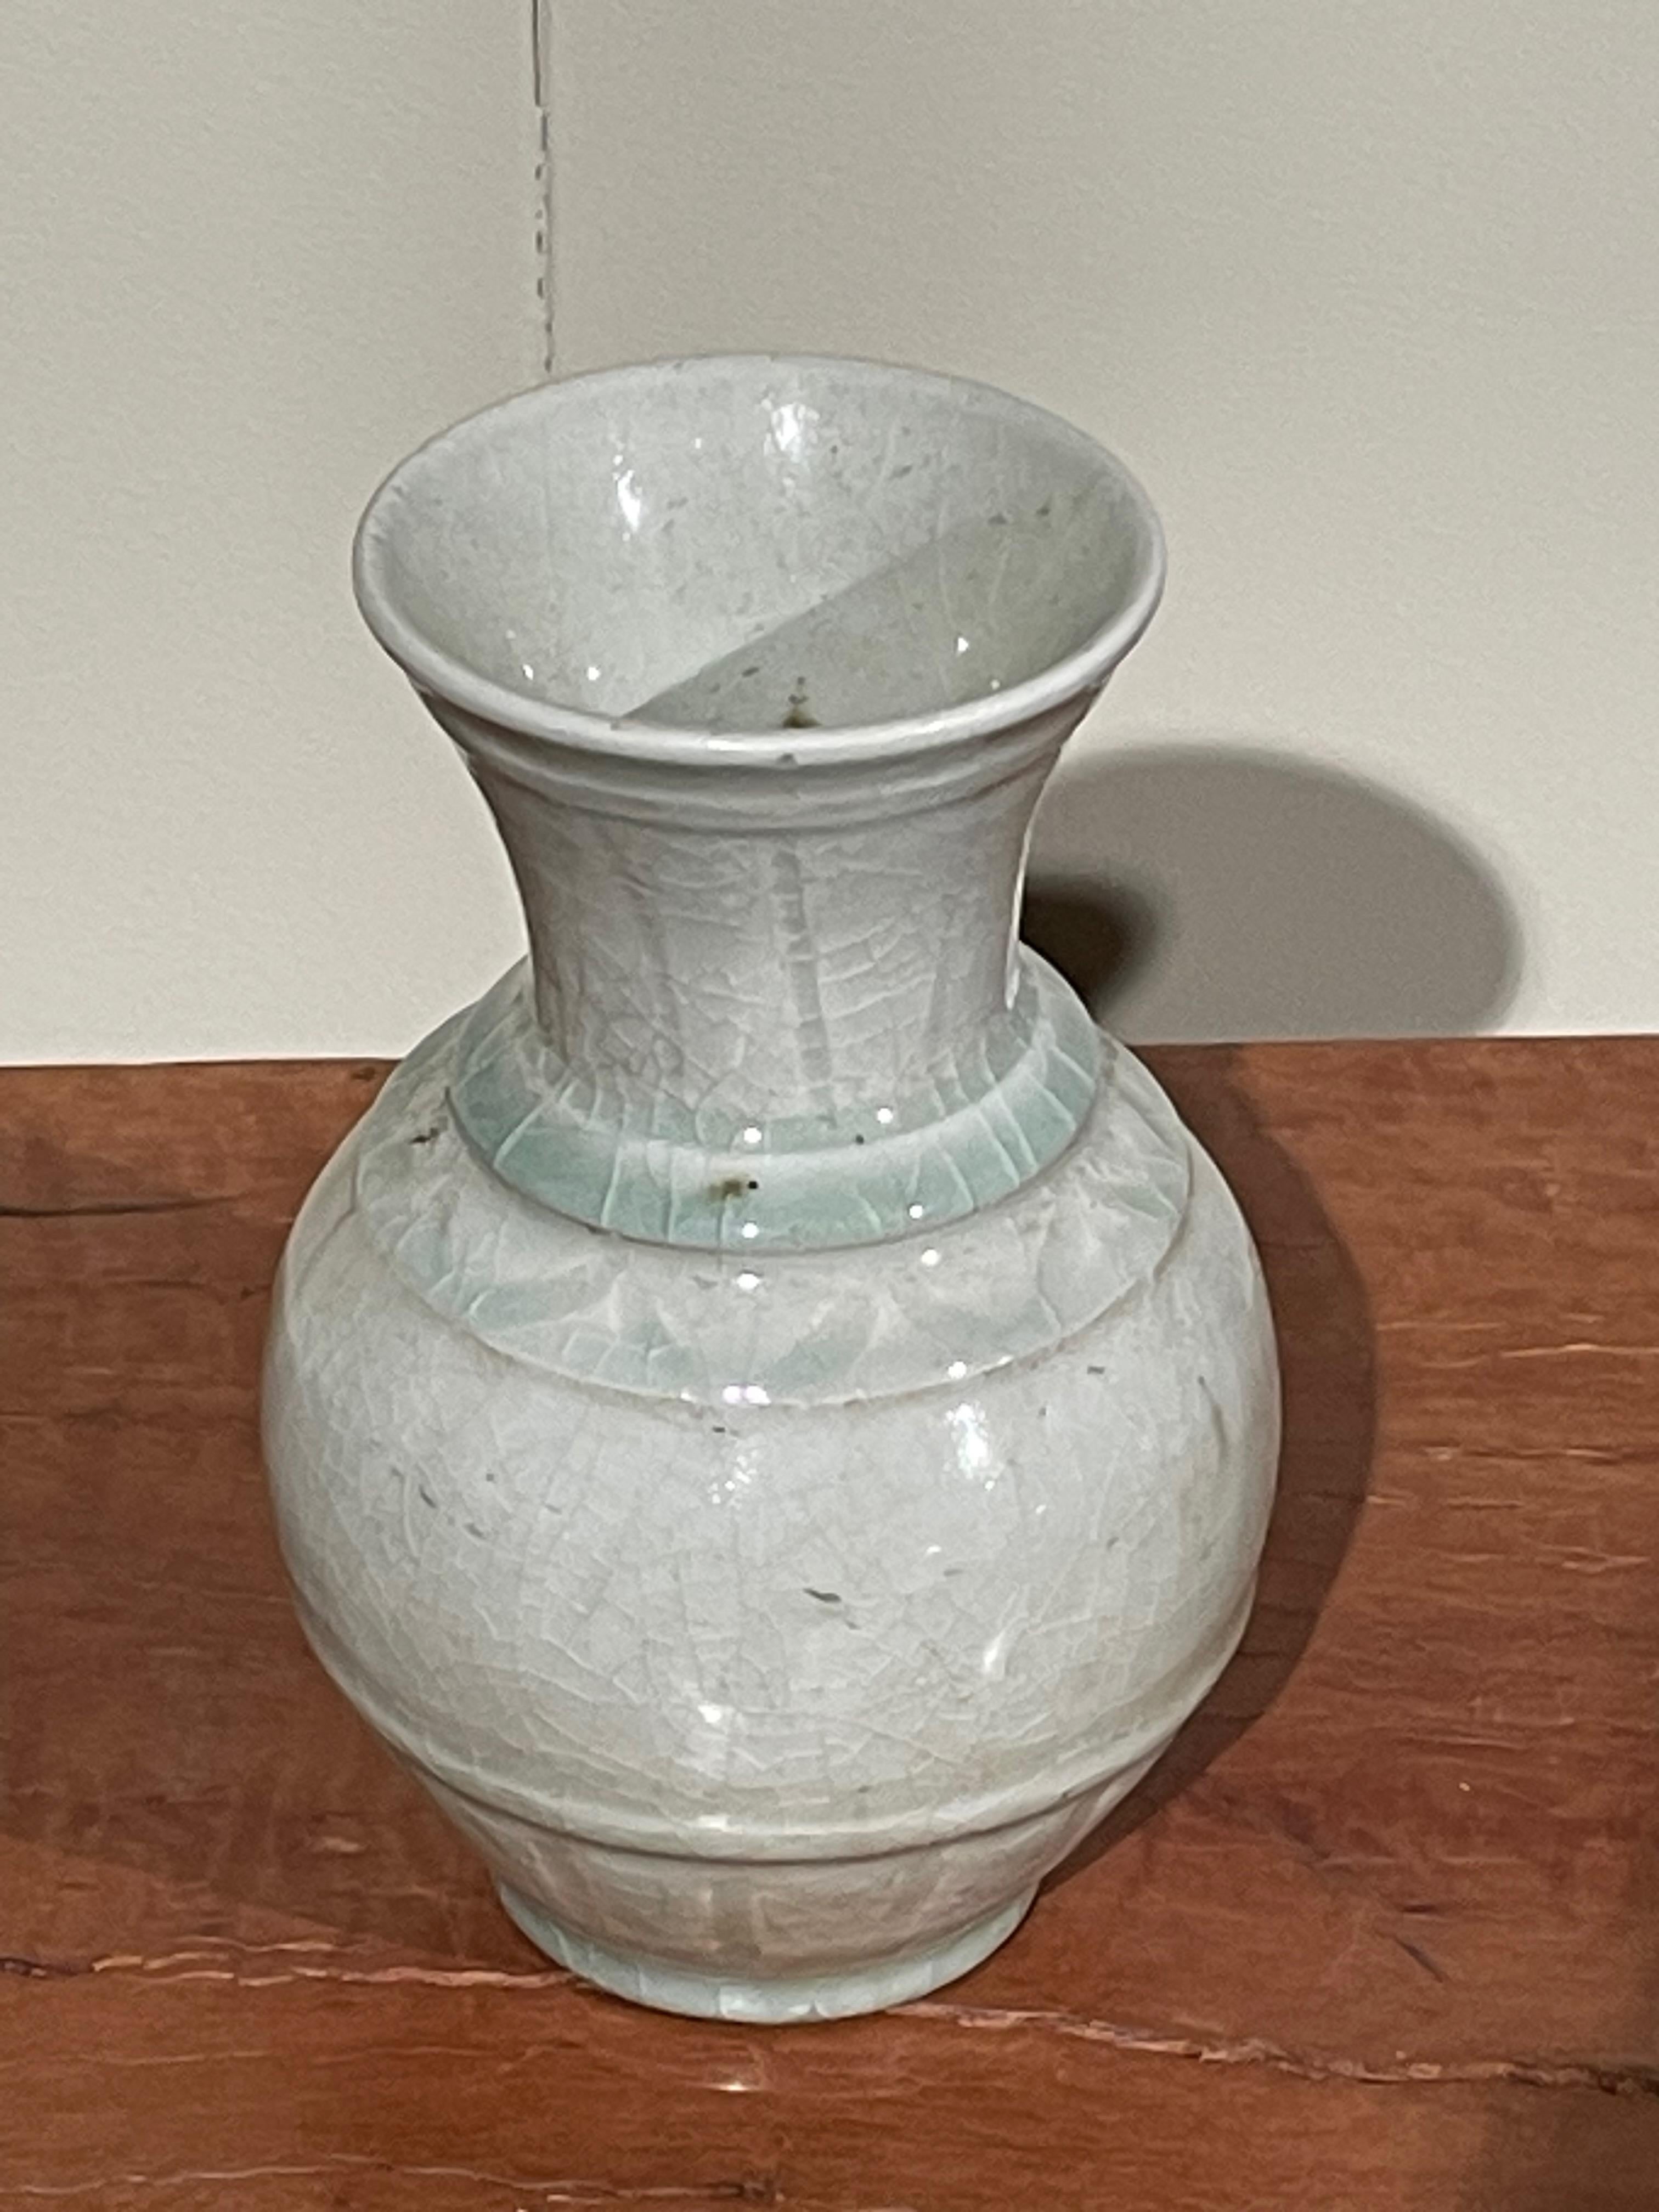 Contemporary Chinese pale turquoise vase.
V design.
From a collection of three pieces sold individually.